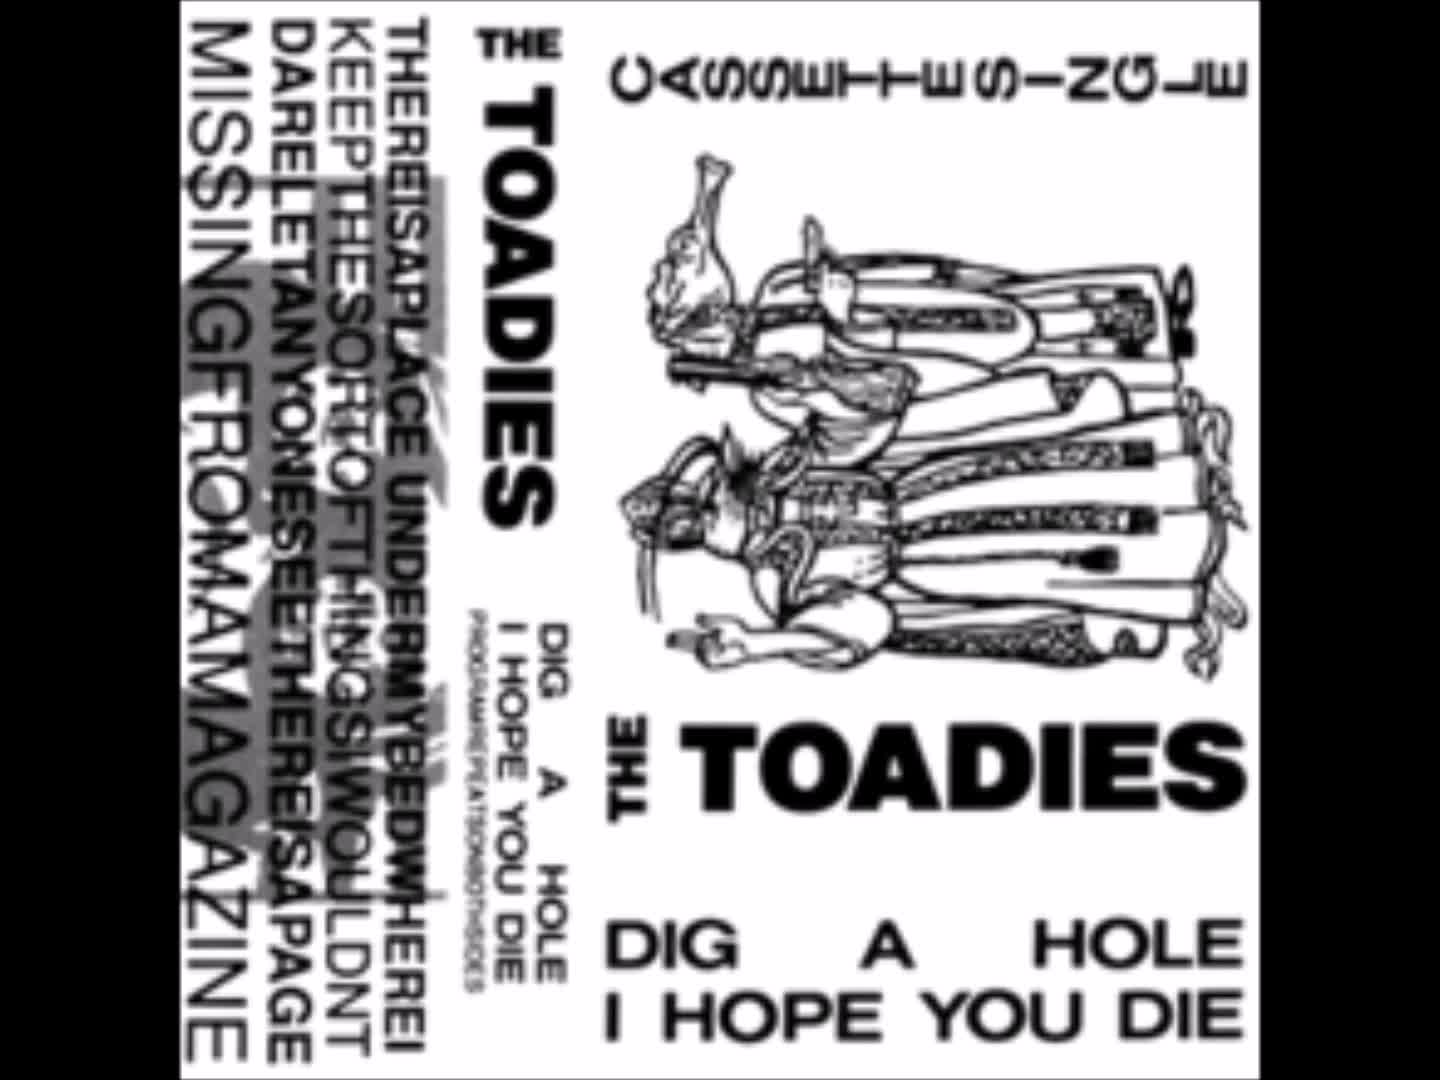 Toadies - Dig A Hole